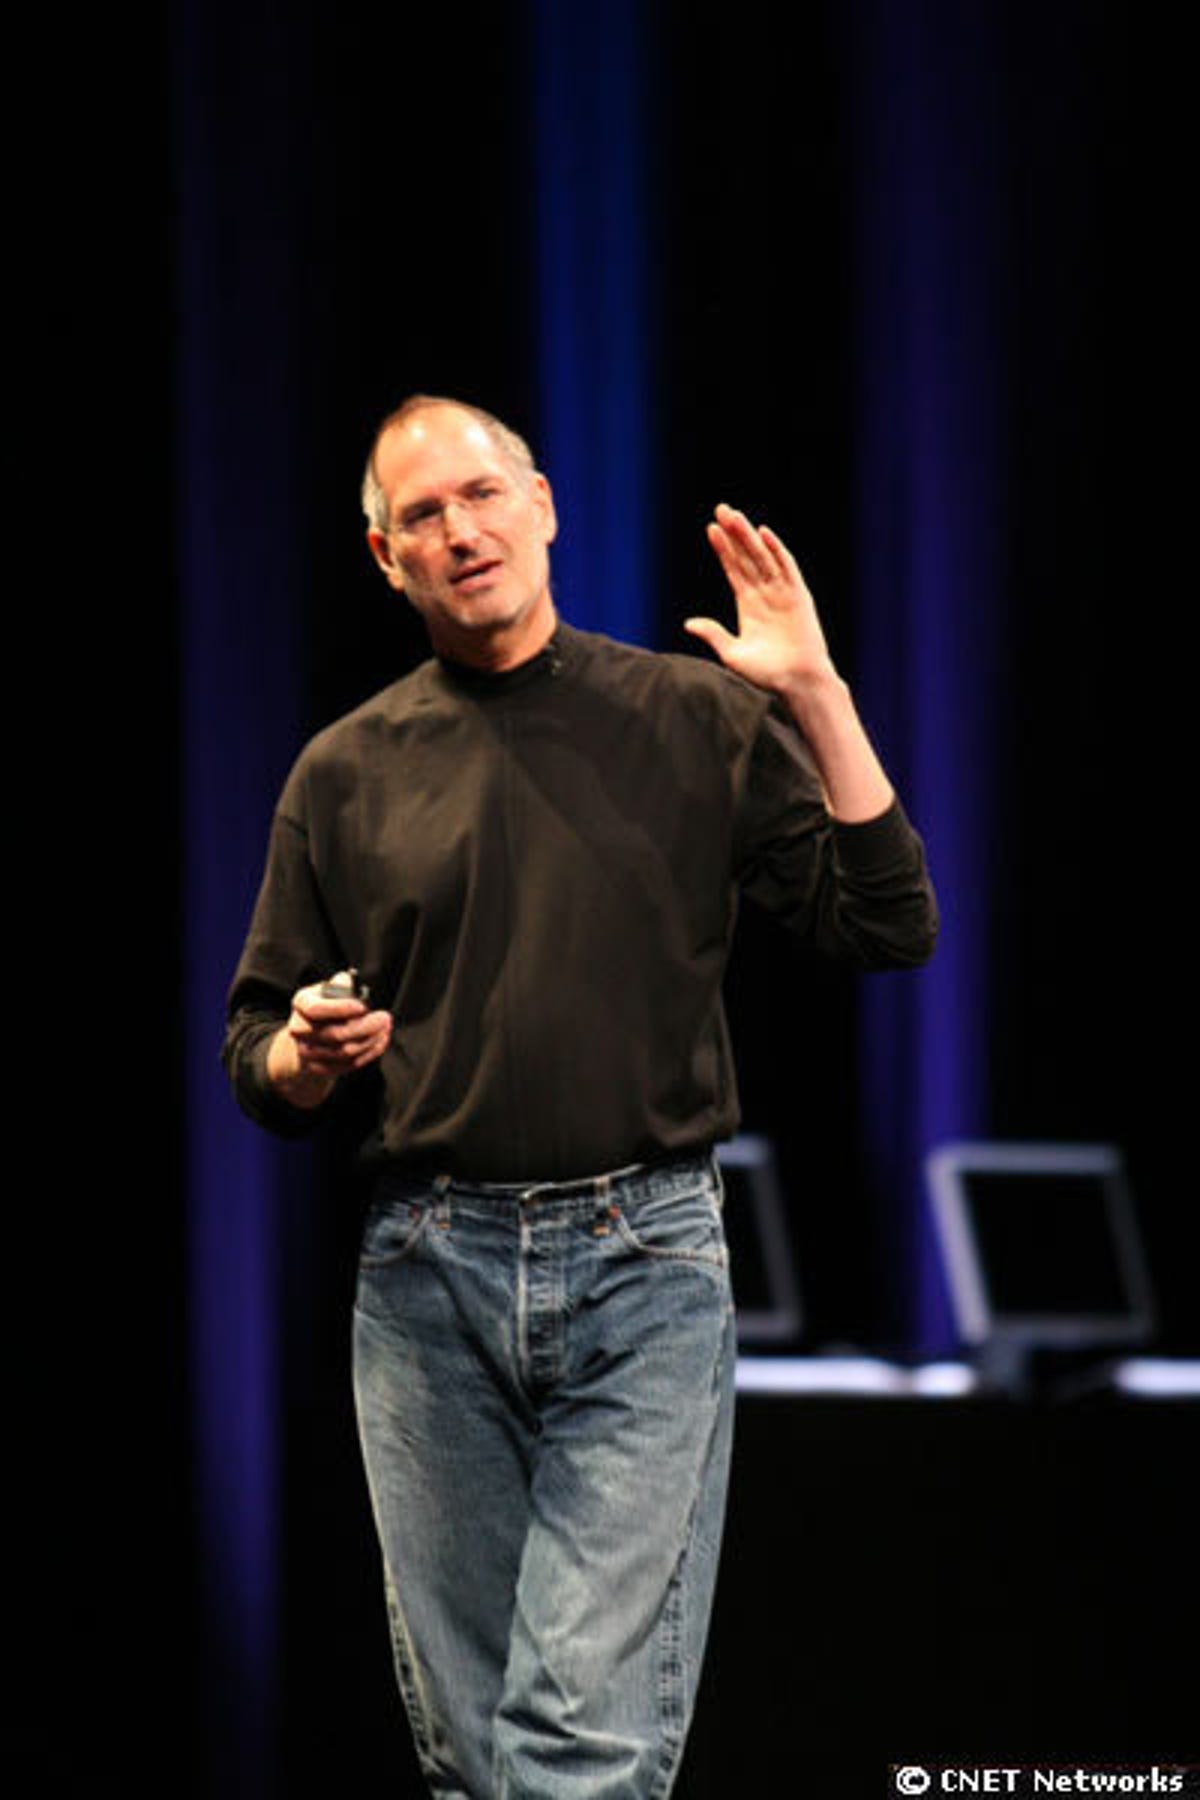 Steve Jobs in photos: 35 years of an American icon - CNET